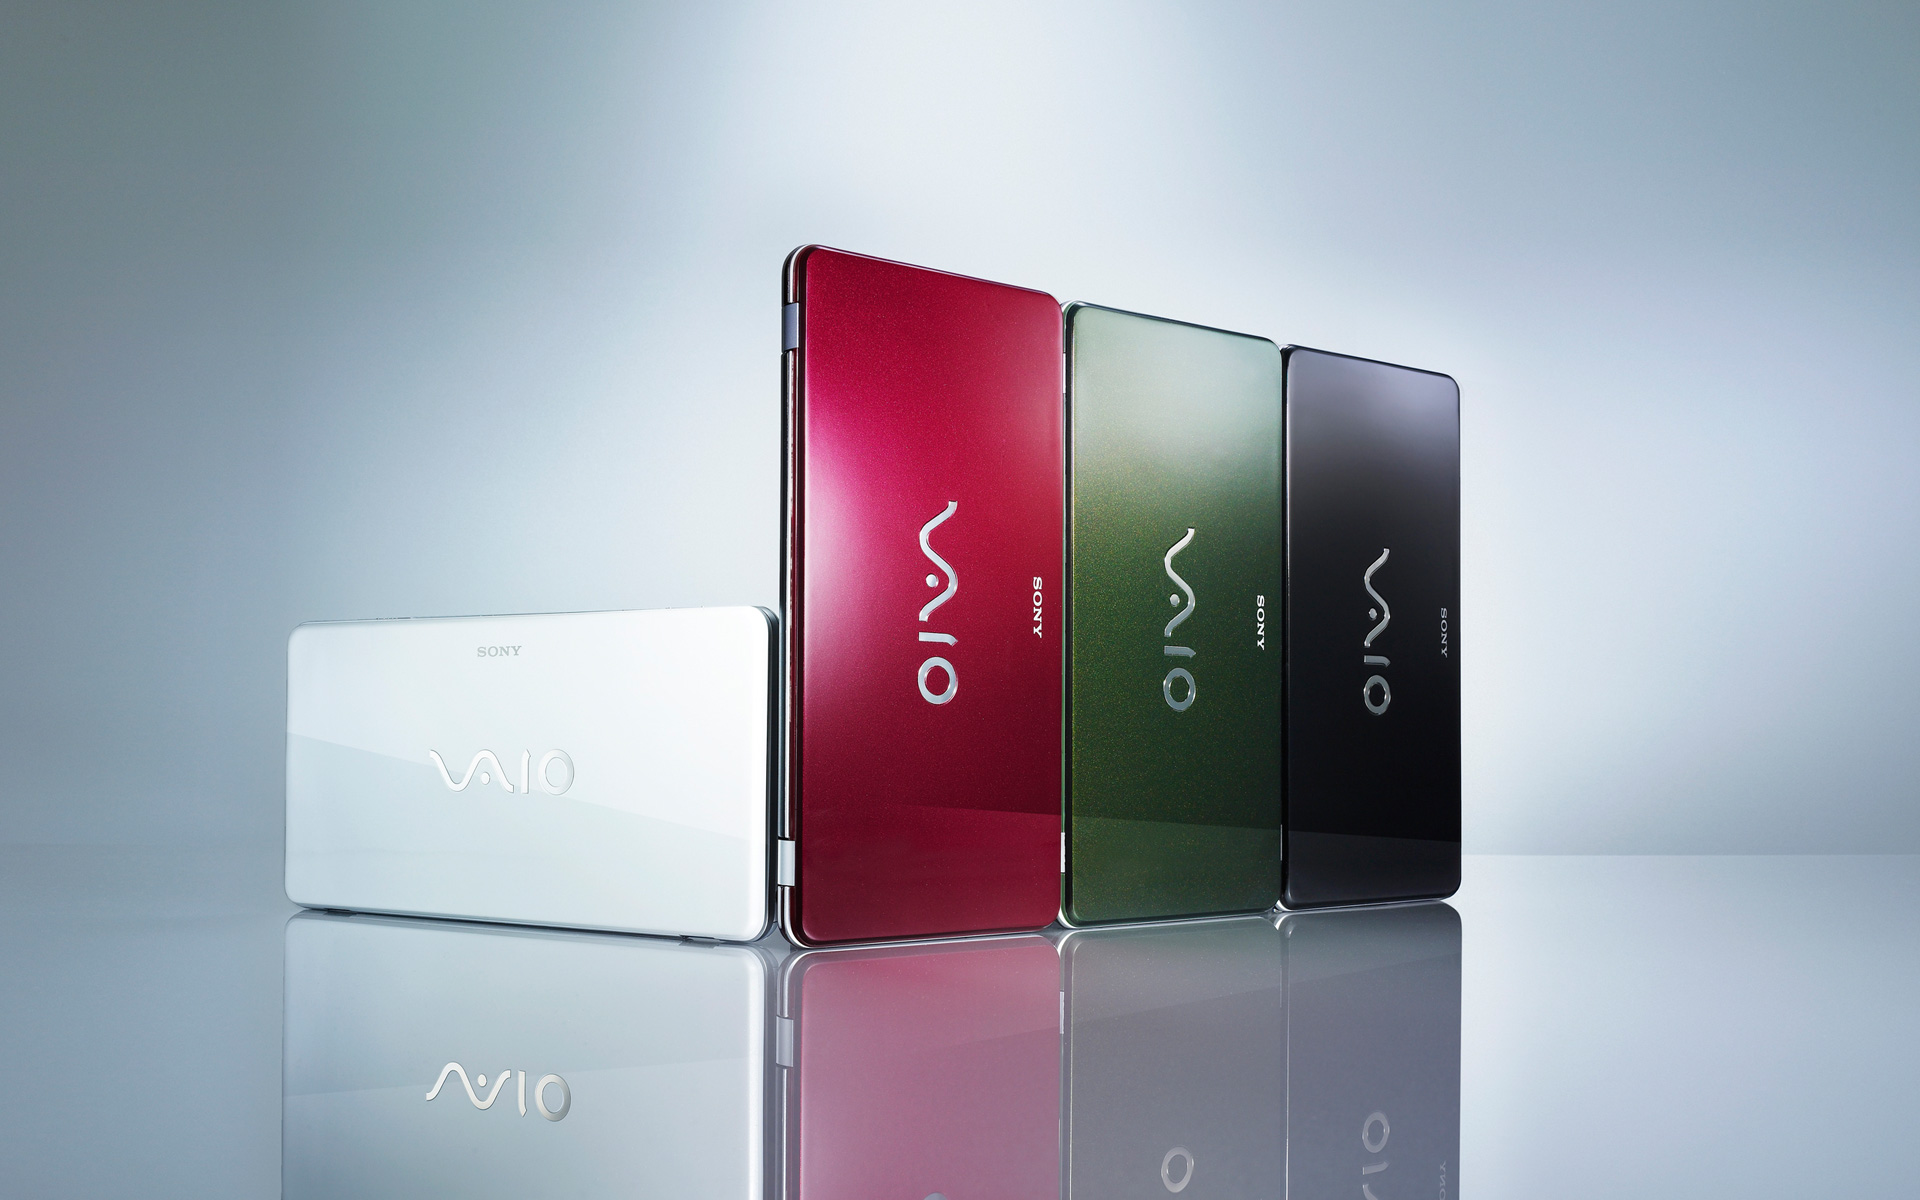 Sony Vaio Notebooks Wallpapers Wallpapers Hd